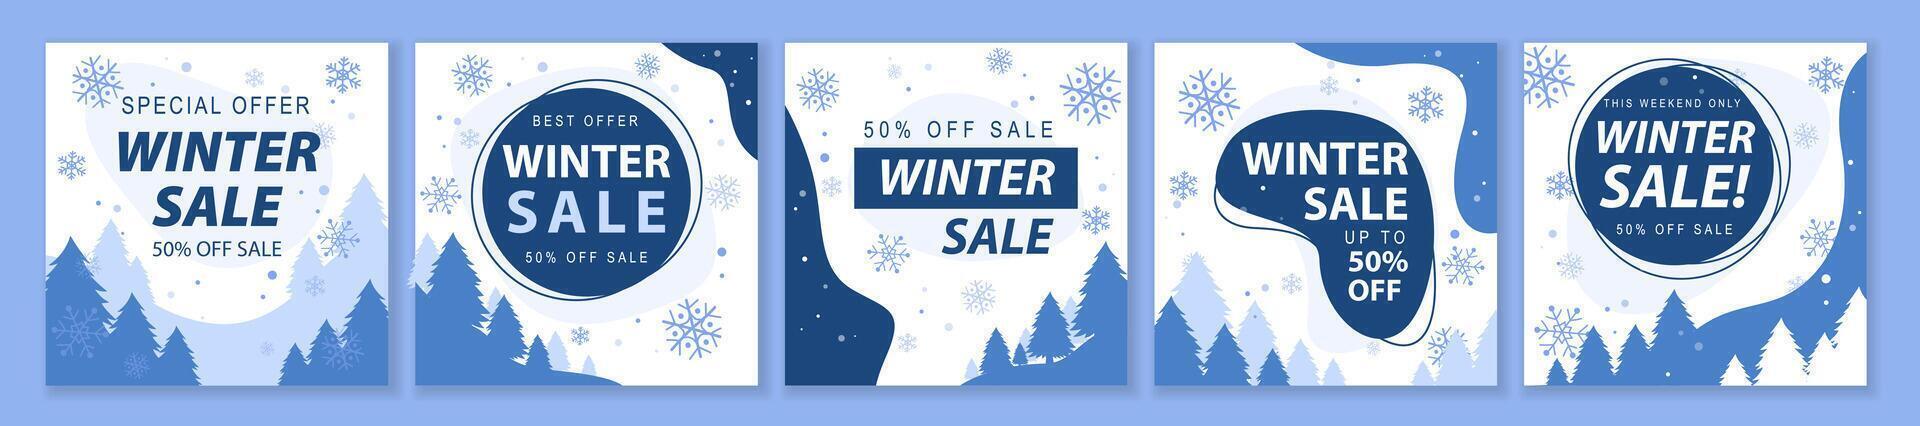 Winter and Christmas Sale square template set for ads posts in social media. Layouts with snowflakes and silhouettes of trees. Suitable for mobile apps, banner design and web ads. illustration. vector